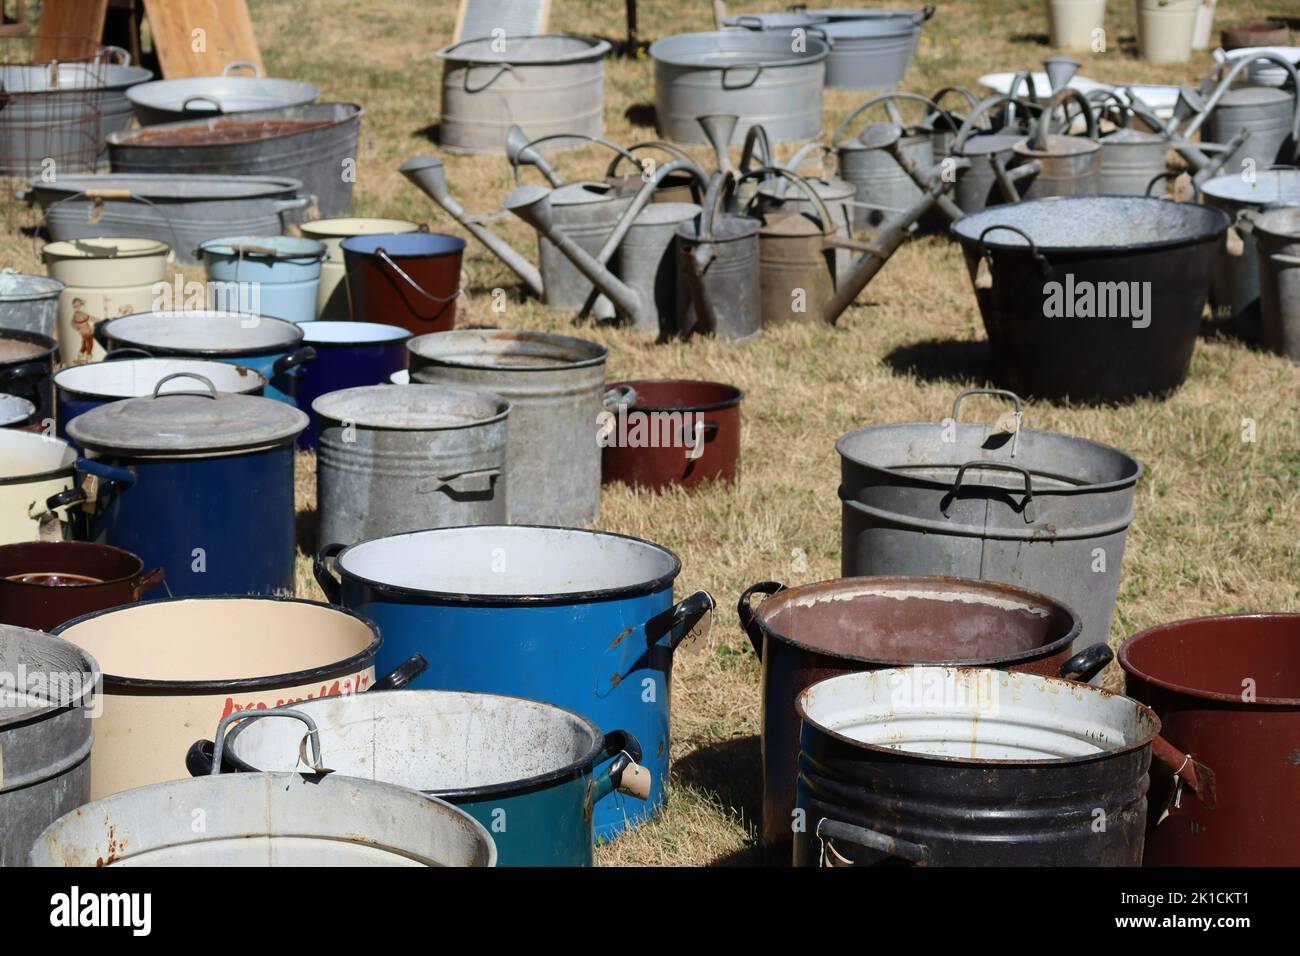 Flea market of Pots and Watering cans Stock Photo